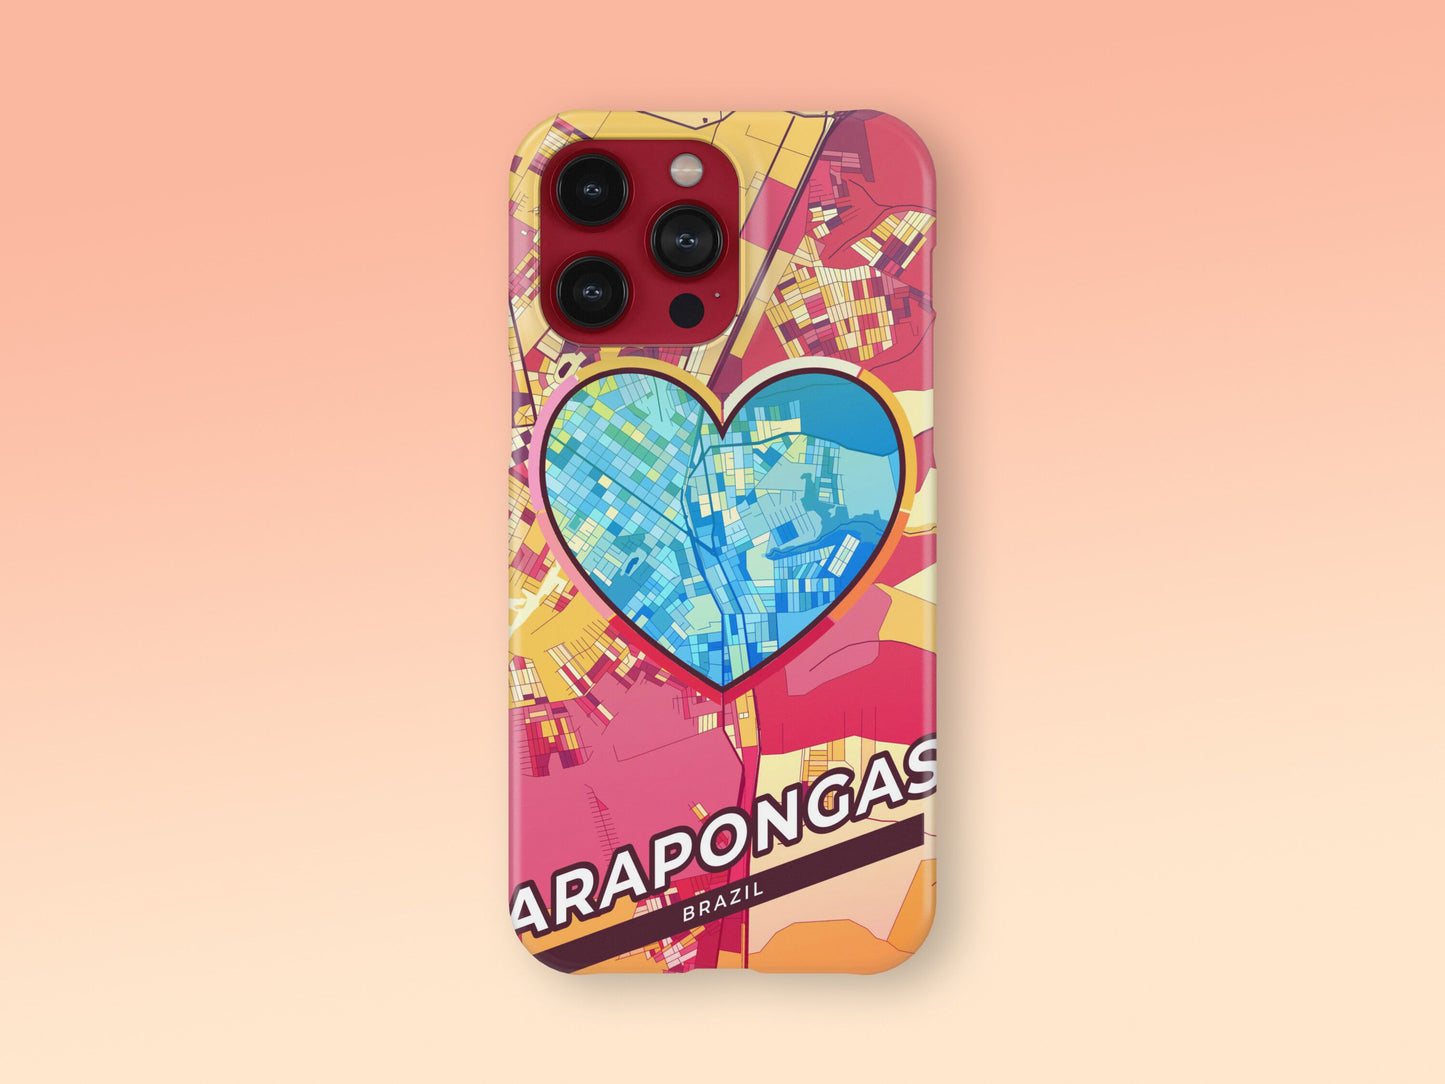 Arapongas Brazil slim phone case with colorful icon. Birthday, wedding or housewarming gift. Couple match cases. 2